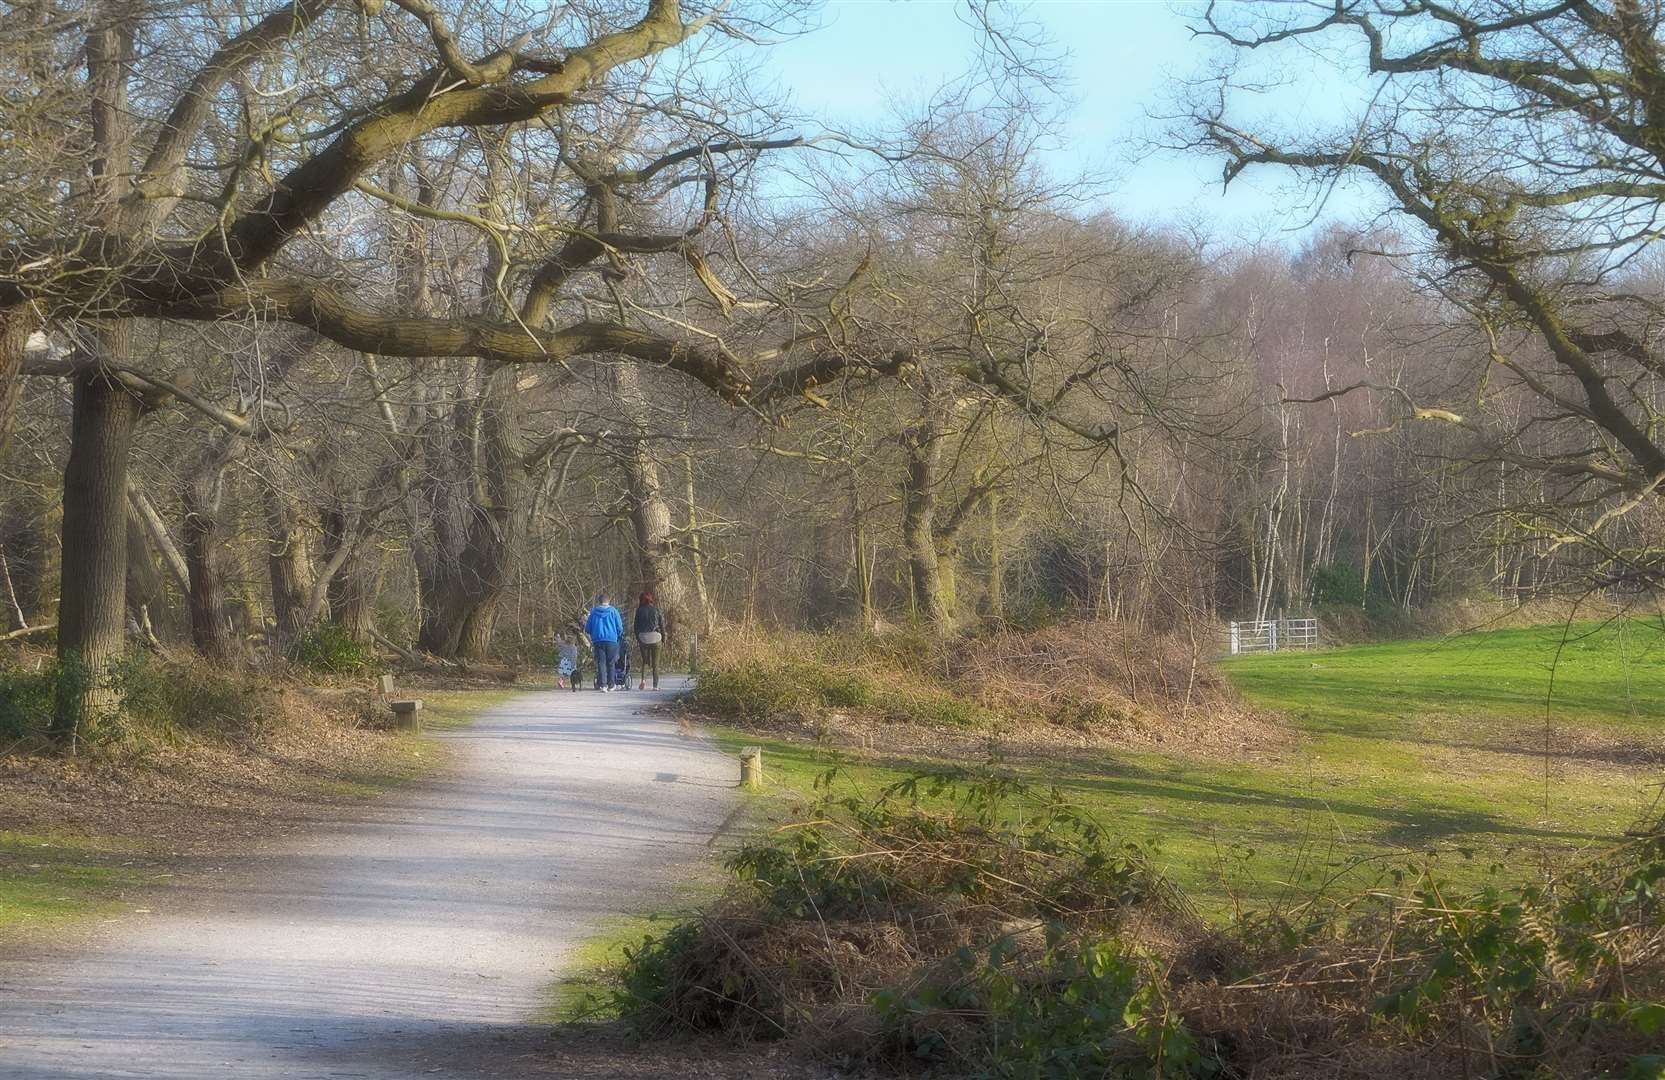 It's feared the Lower Thames Crossing will destroy some of Kent's ancient woodland